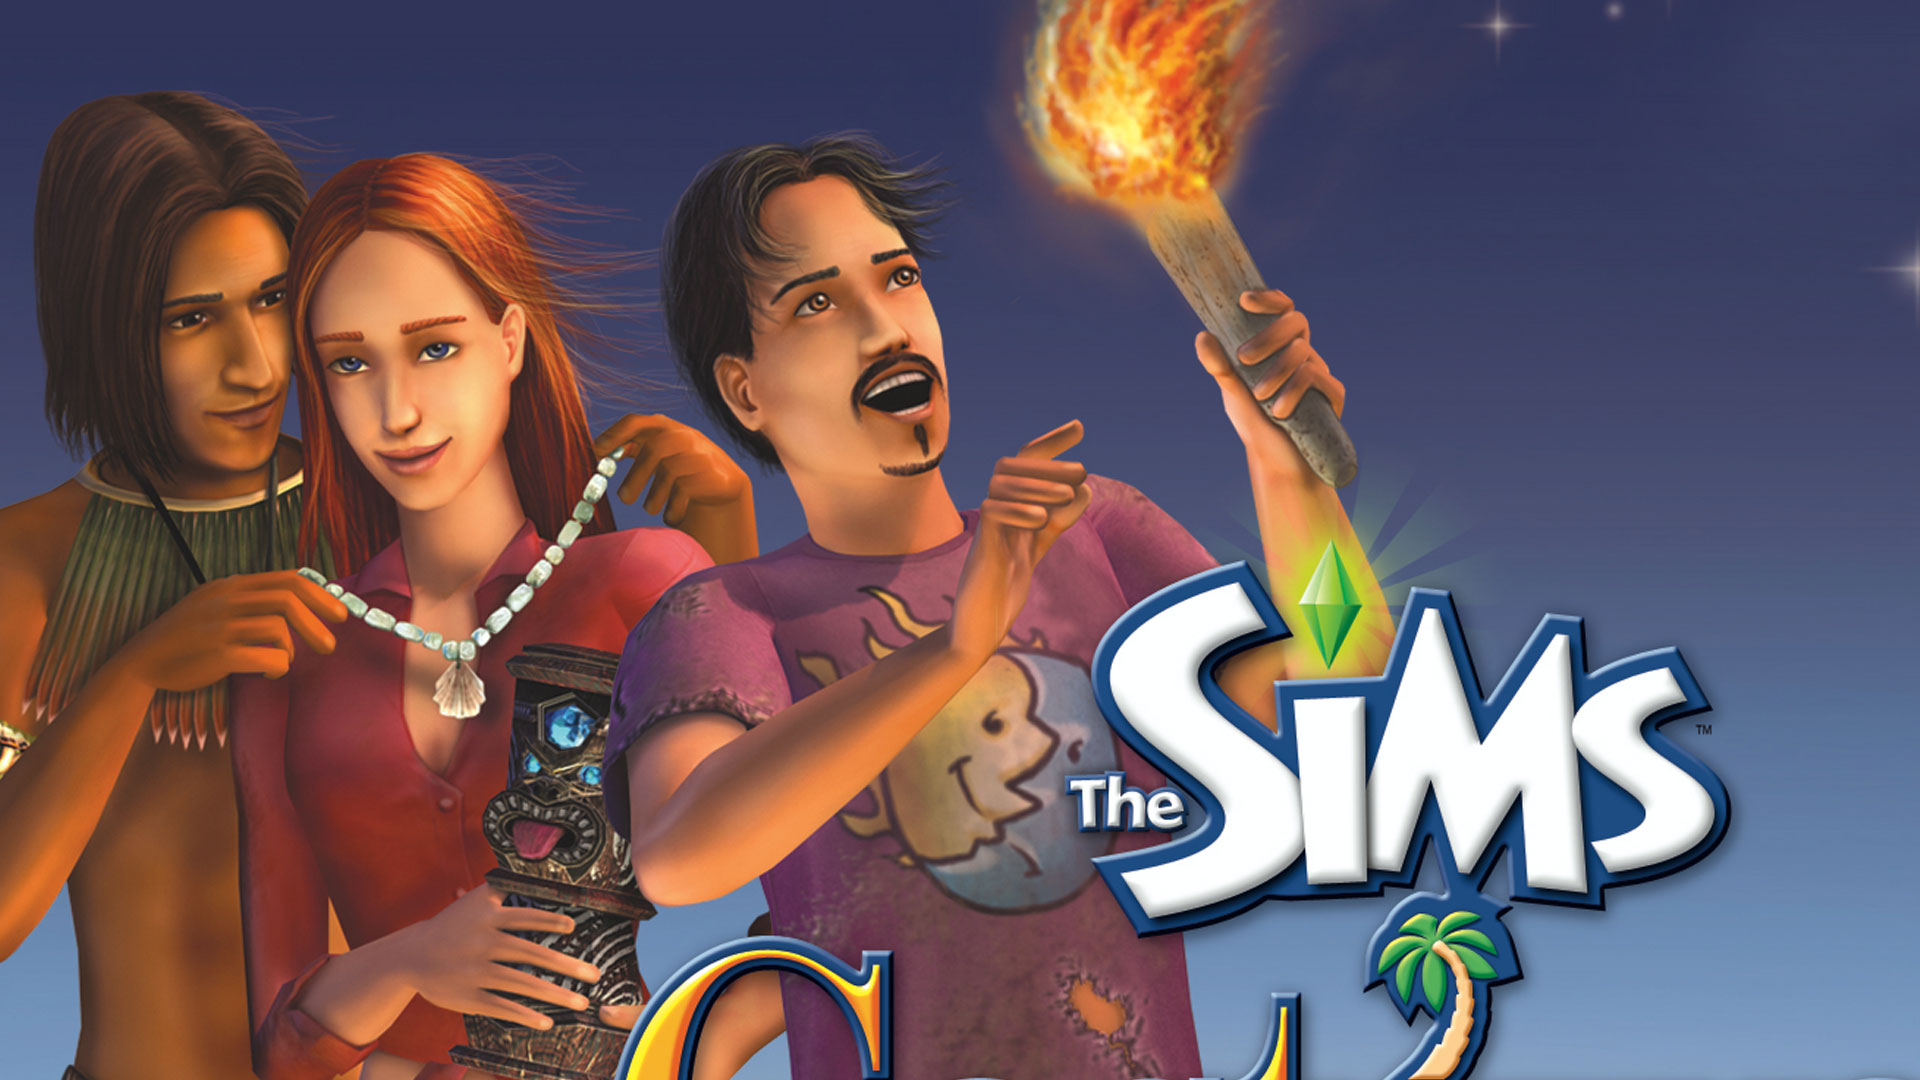 the sims castaway stories